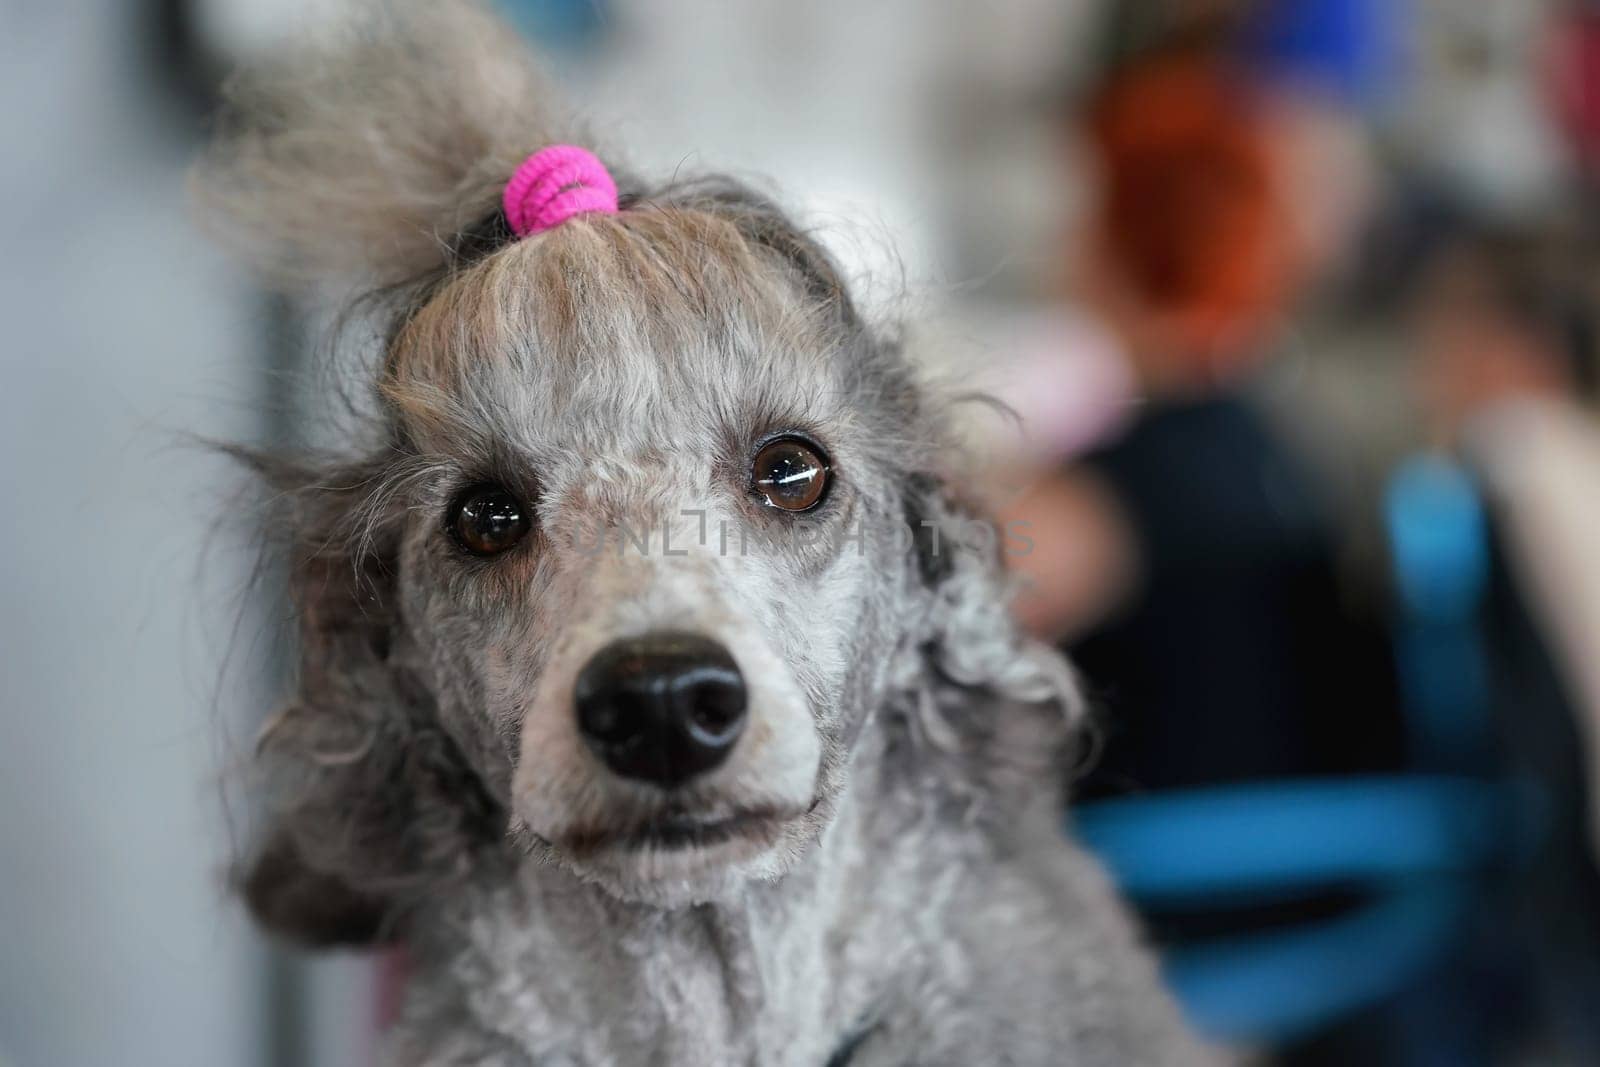 Gray poodle dog getting groomed at dog show contest, detail on funny looking face, pink rubber band in hair by Ivanko